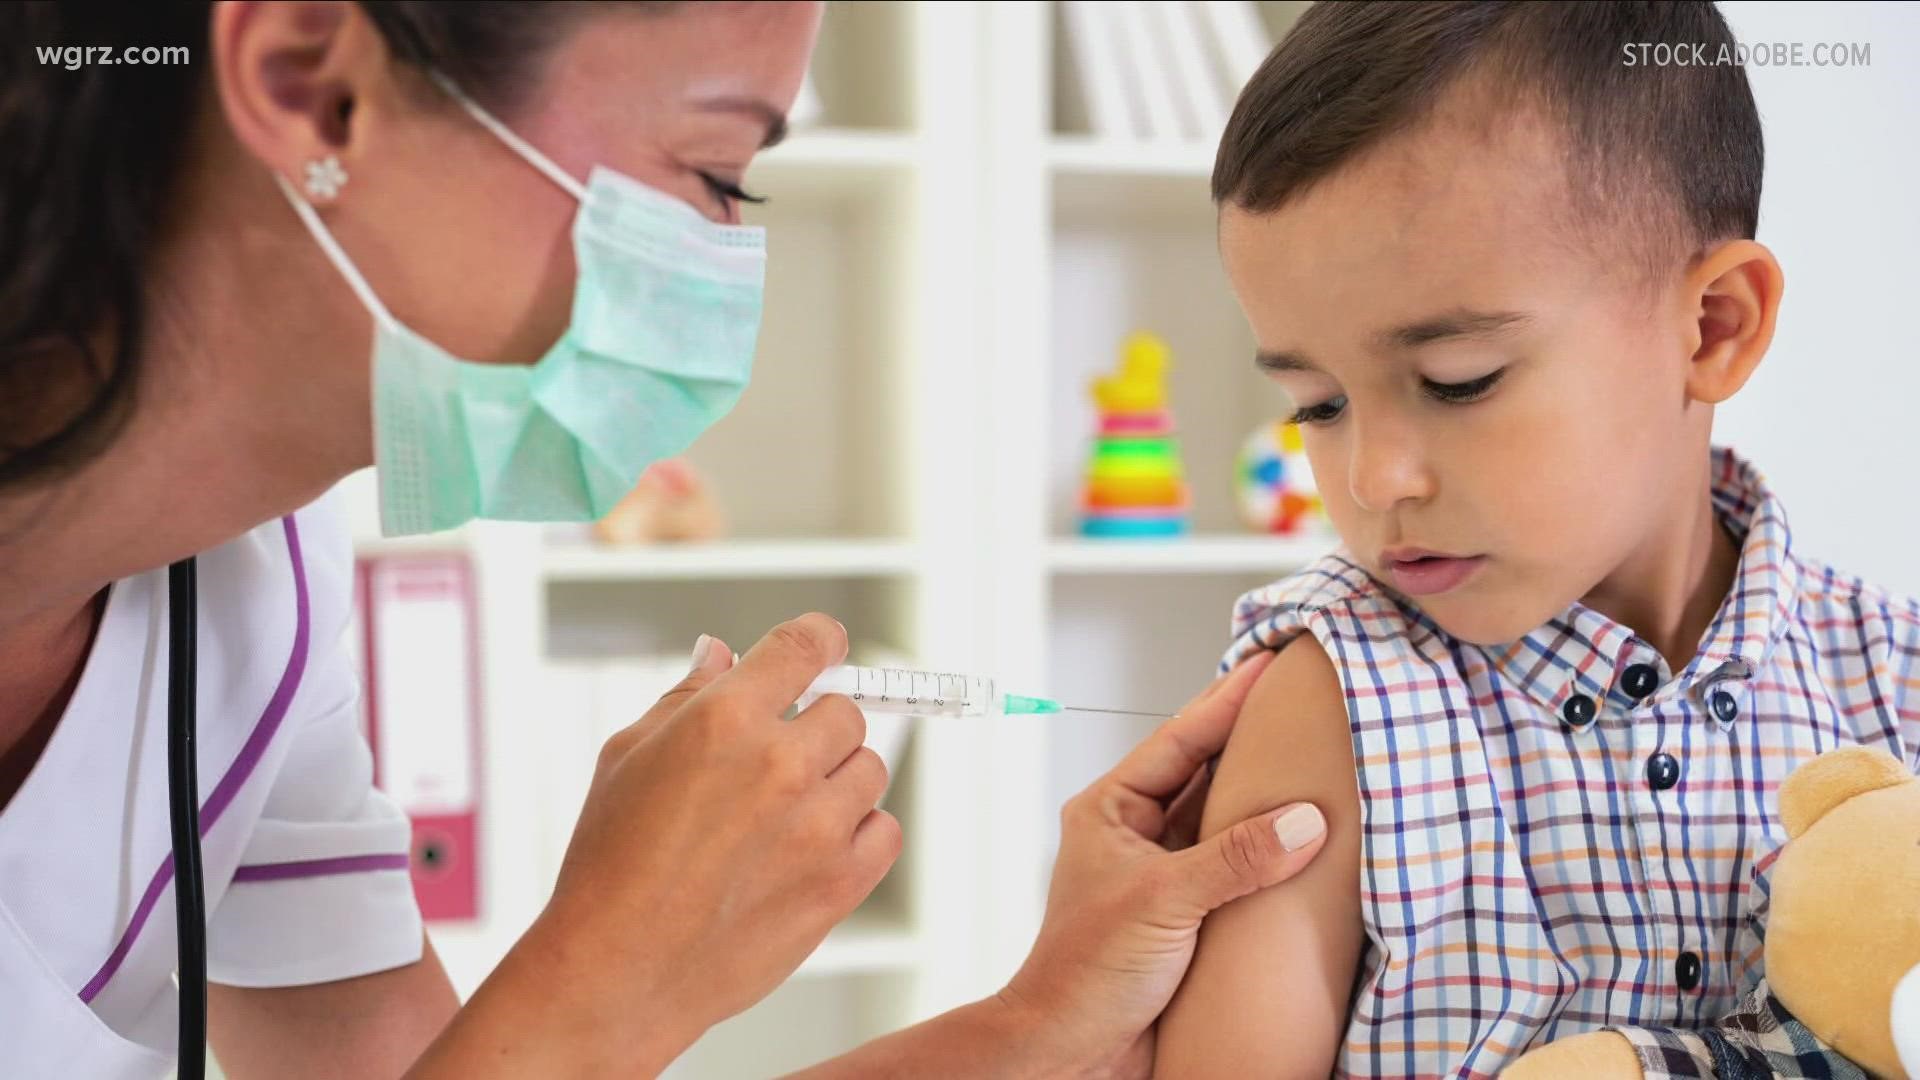 Starting January 1st, children ages 5 or older will need to show proof they have gotten the first dose of COVID vaccine to attend athletic events at UB.